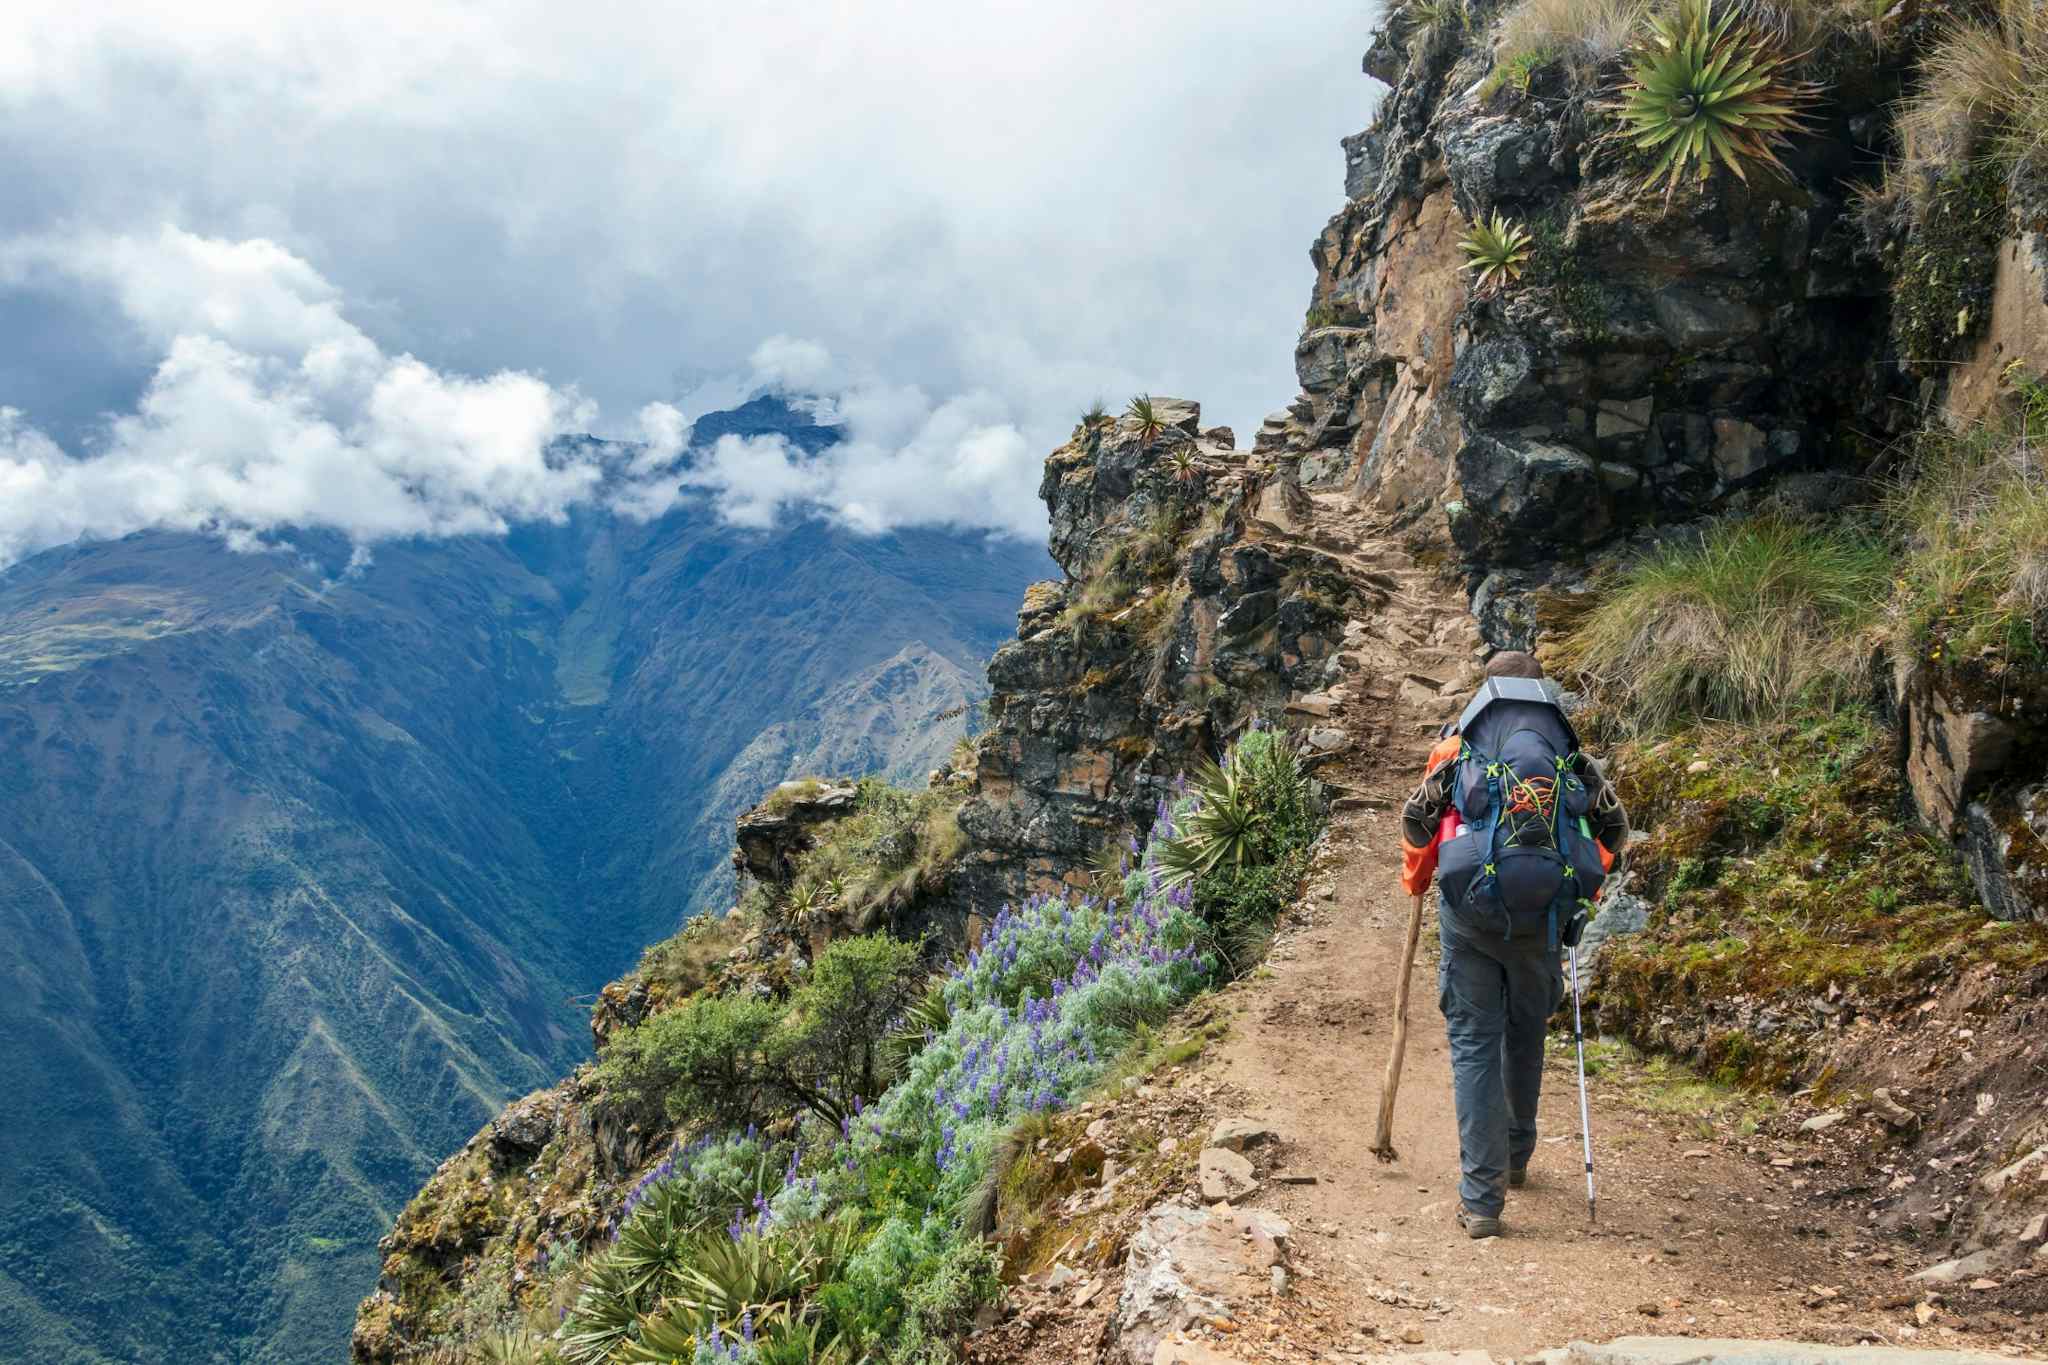 Hikers walks along the Abra San Juan Pass on the Choquequirao Trek. Photo: Canva link:https://www.canva.com/photos/MADnM0ZkcdI-young-hiker-man-trekking-with-backpack-in-peruvian-andes-mountains-peru-south-america/